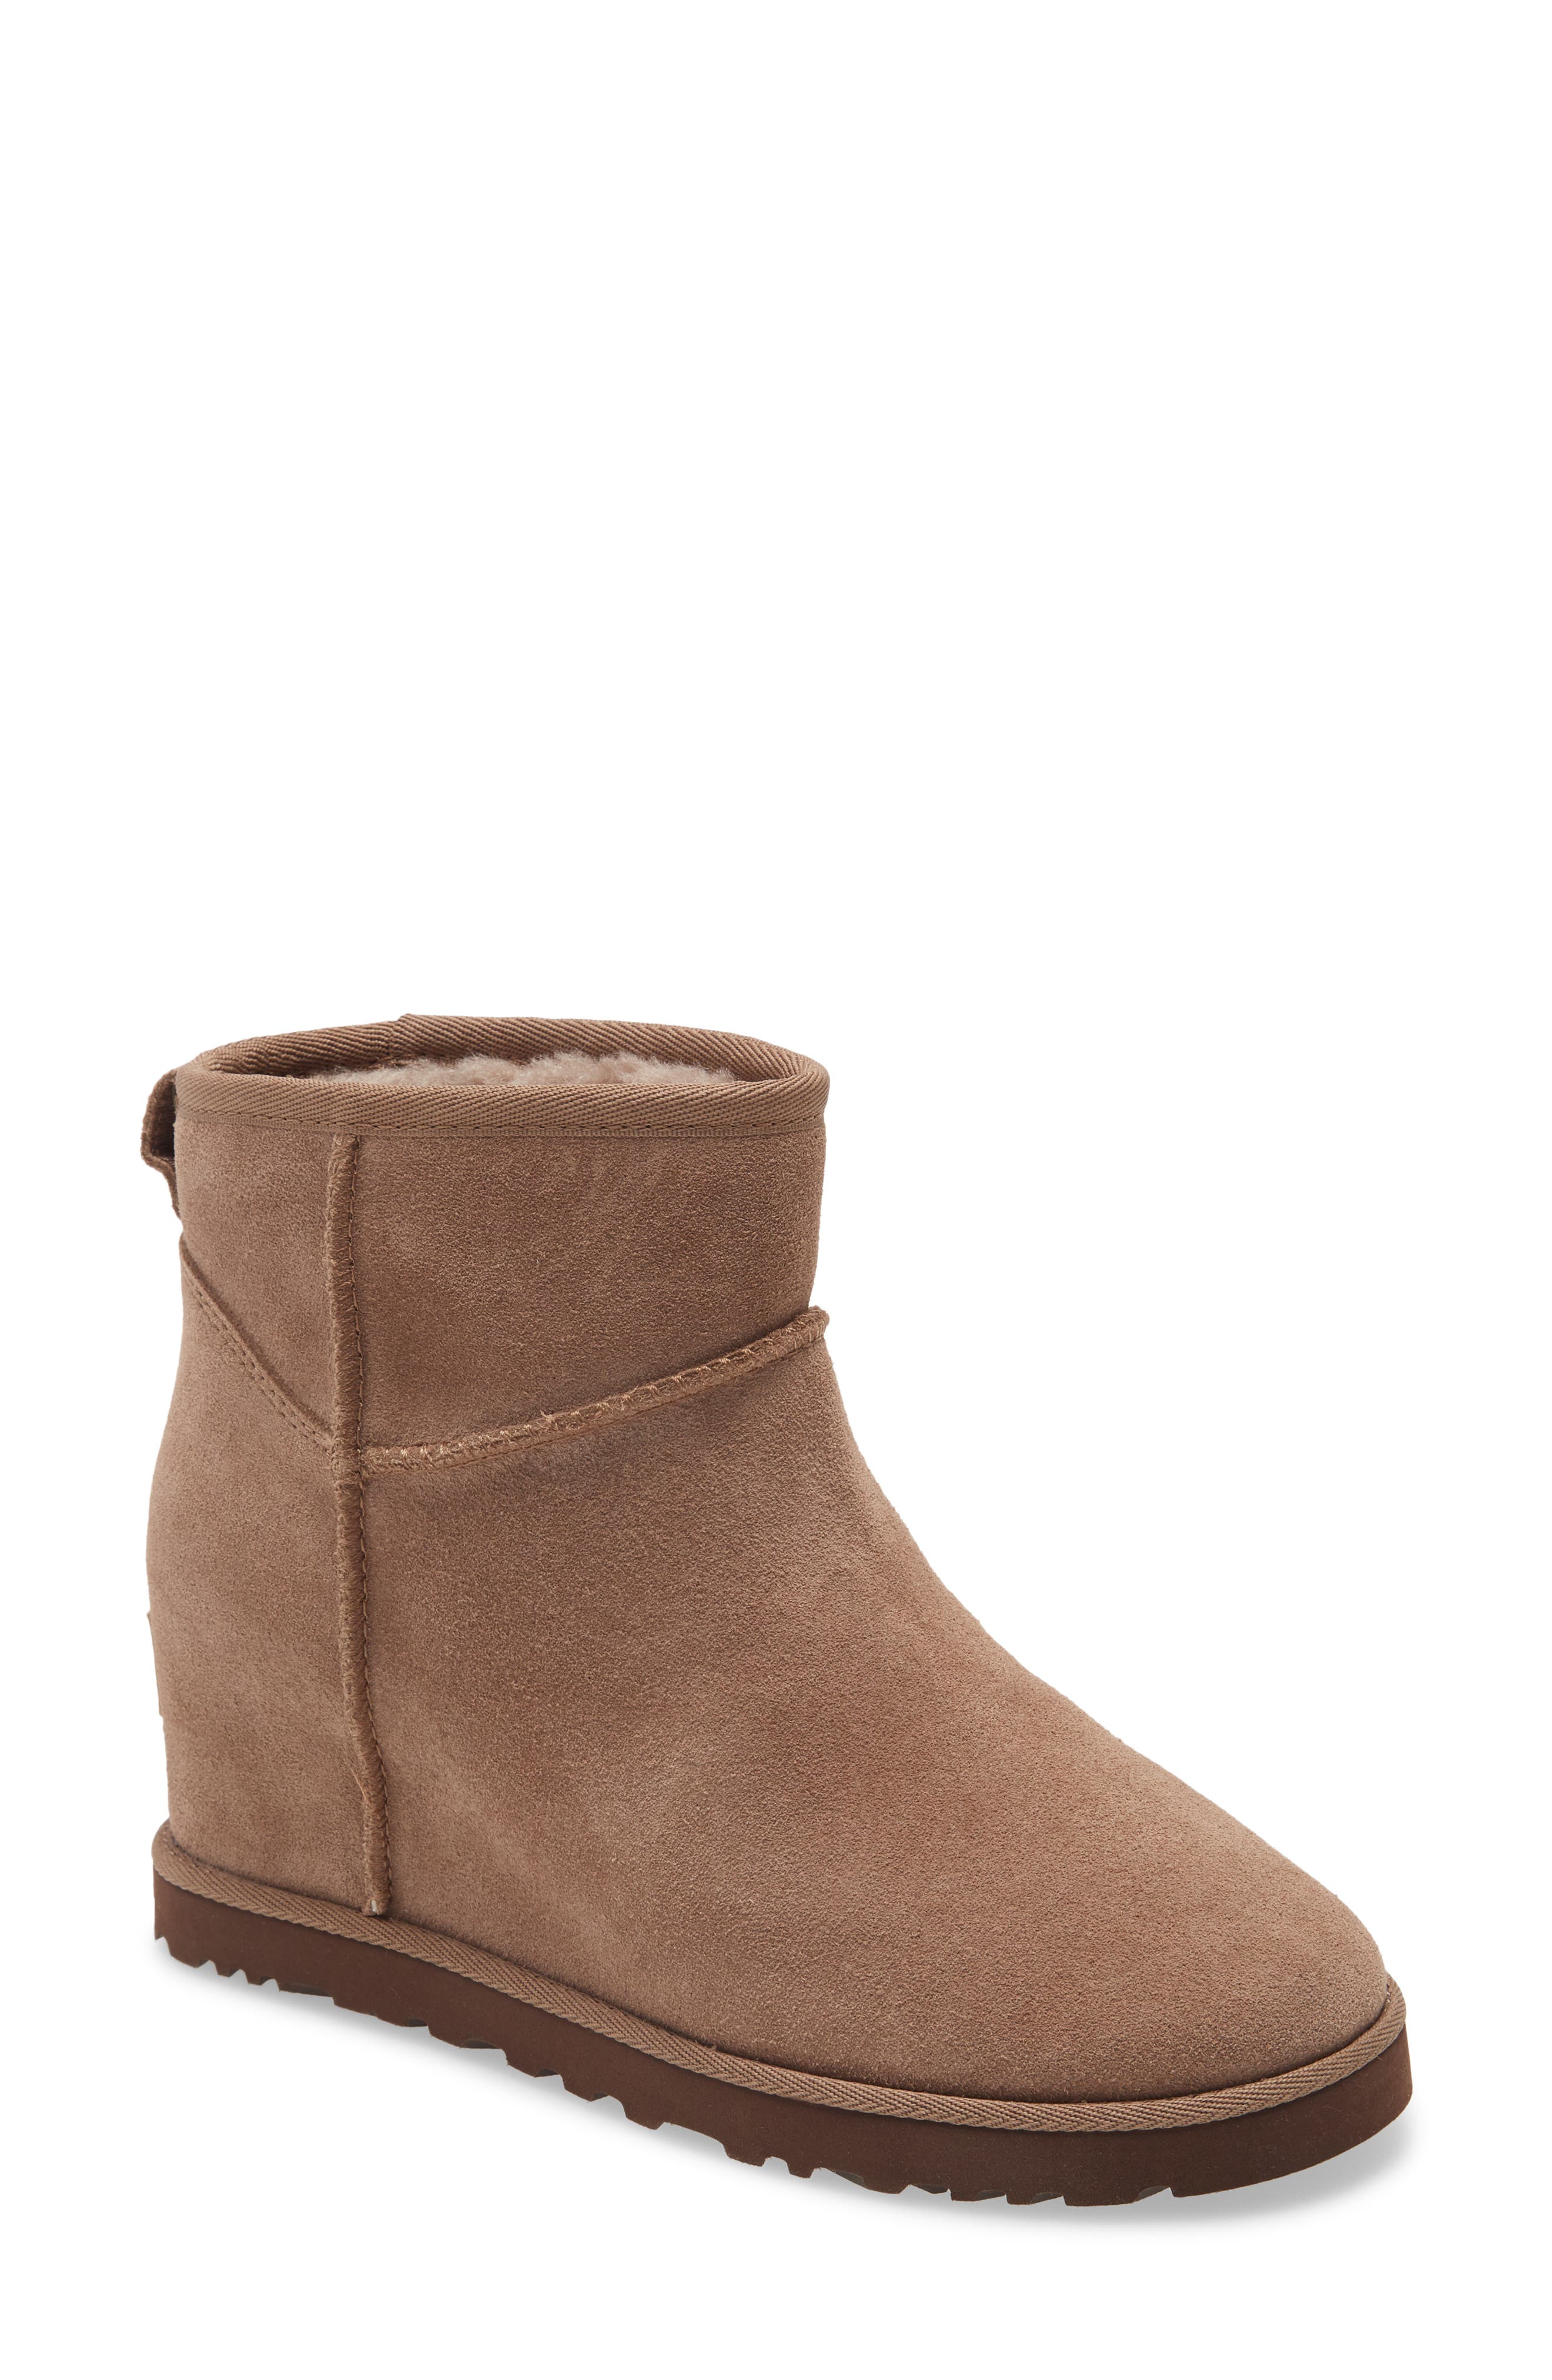 tan wedge boots ankle